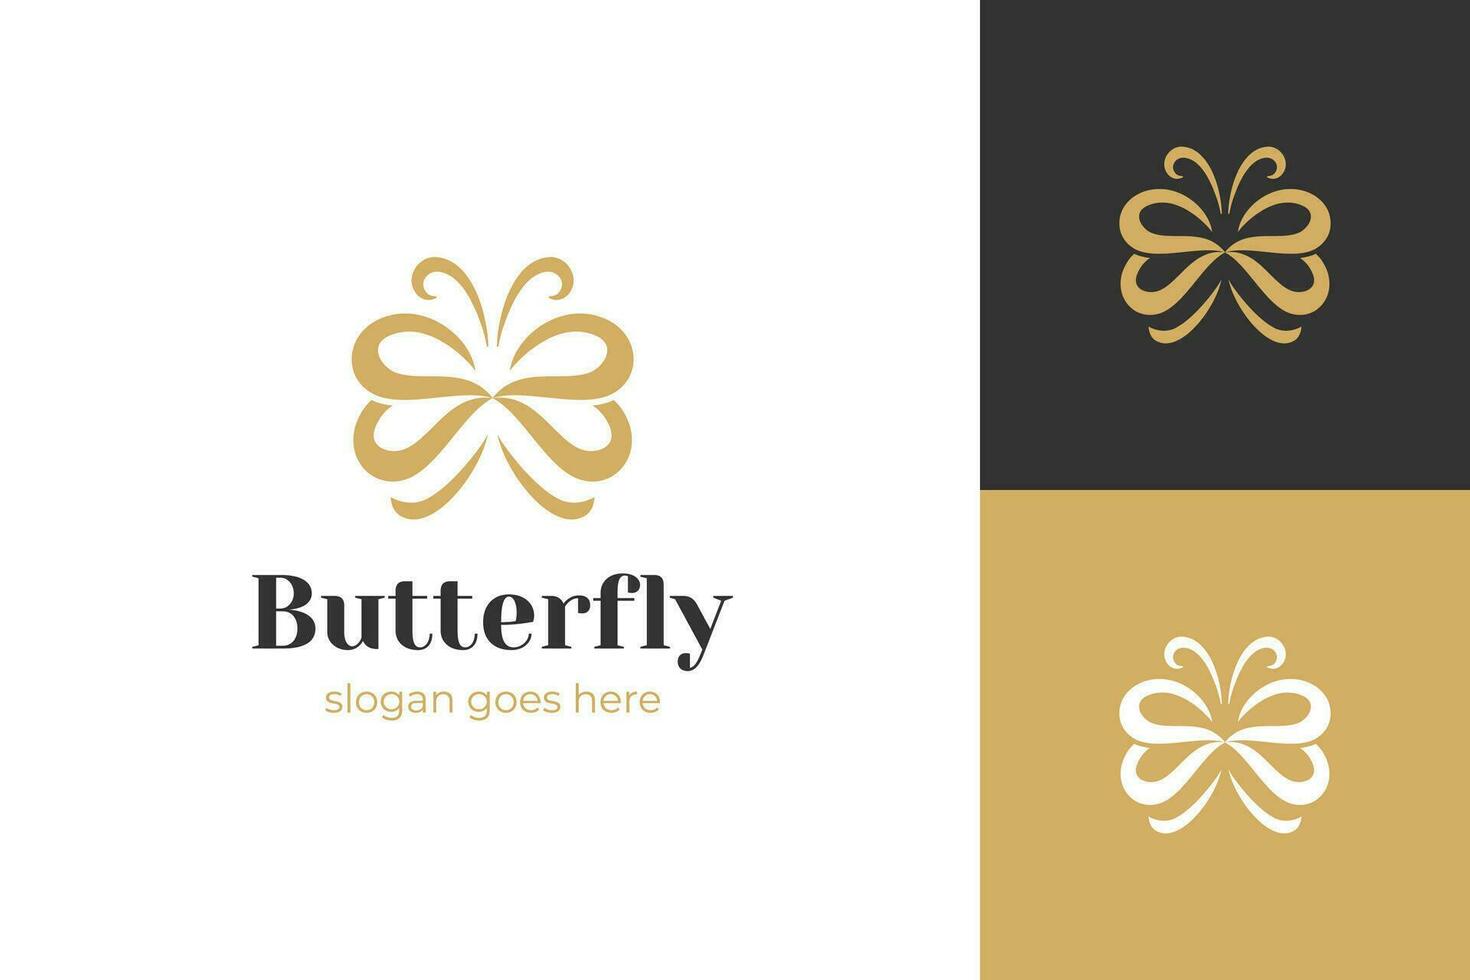 Abstract Butterfly logo icon design for jewelry, cosmetic and beauty nature logo symbol vector